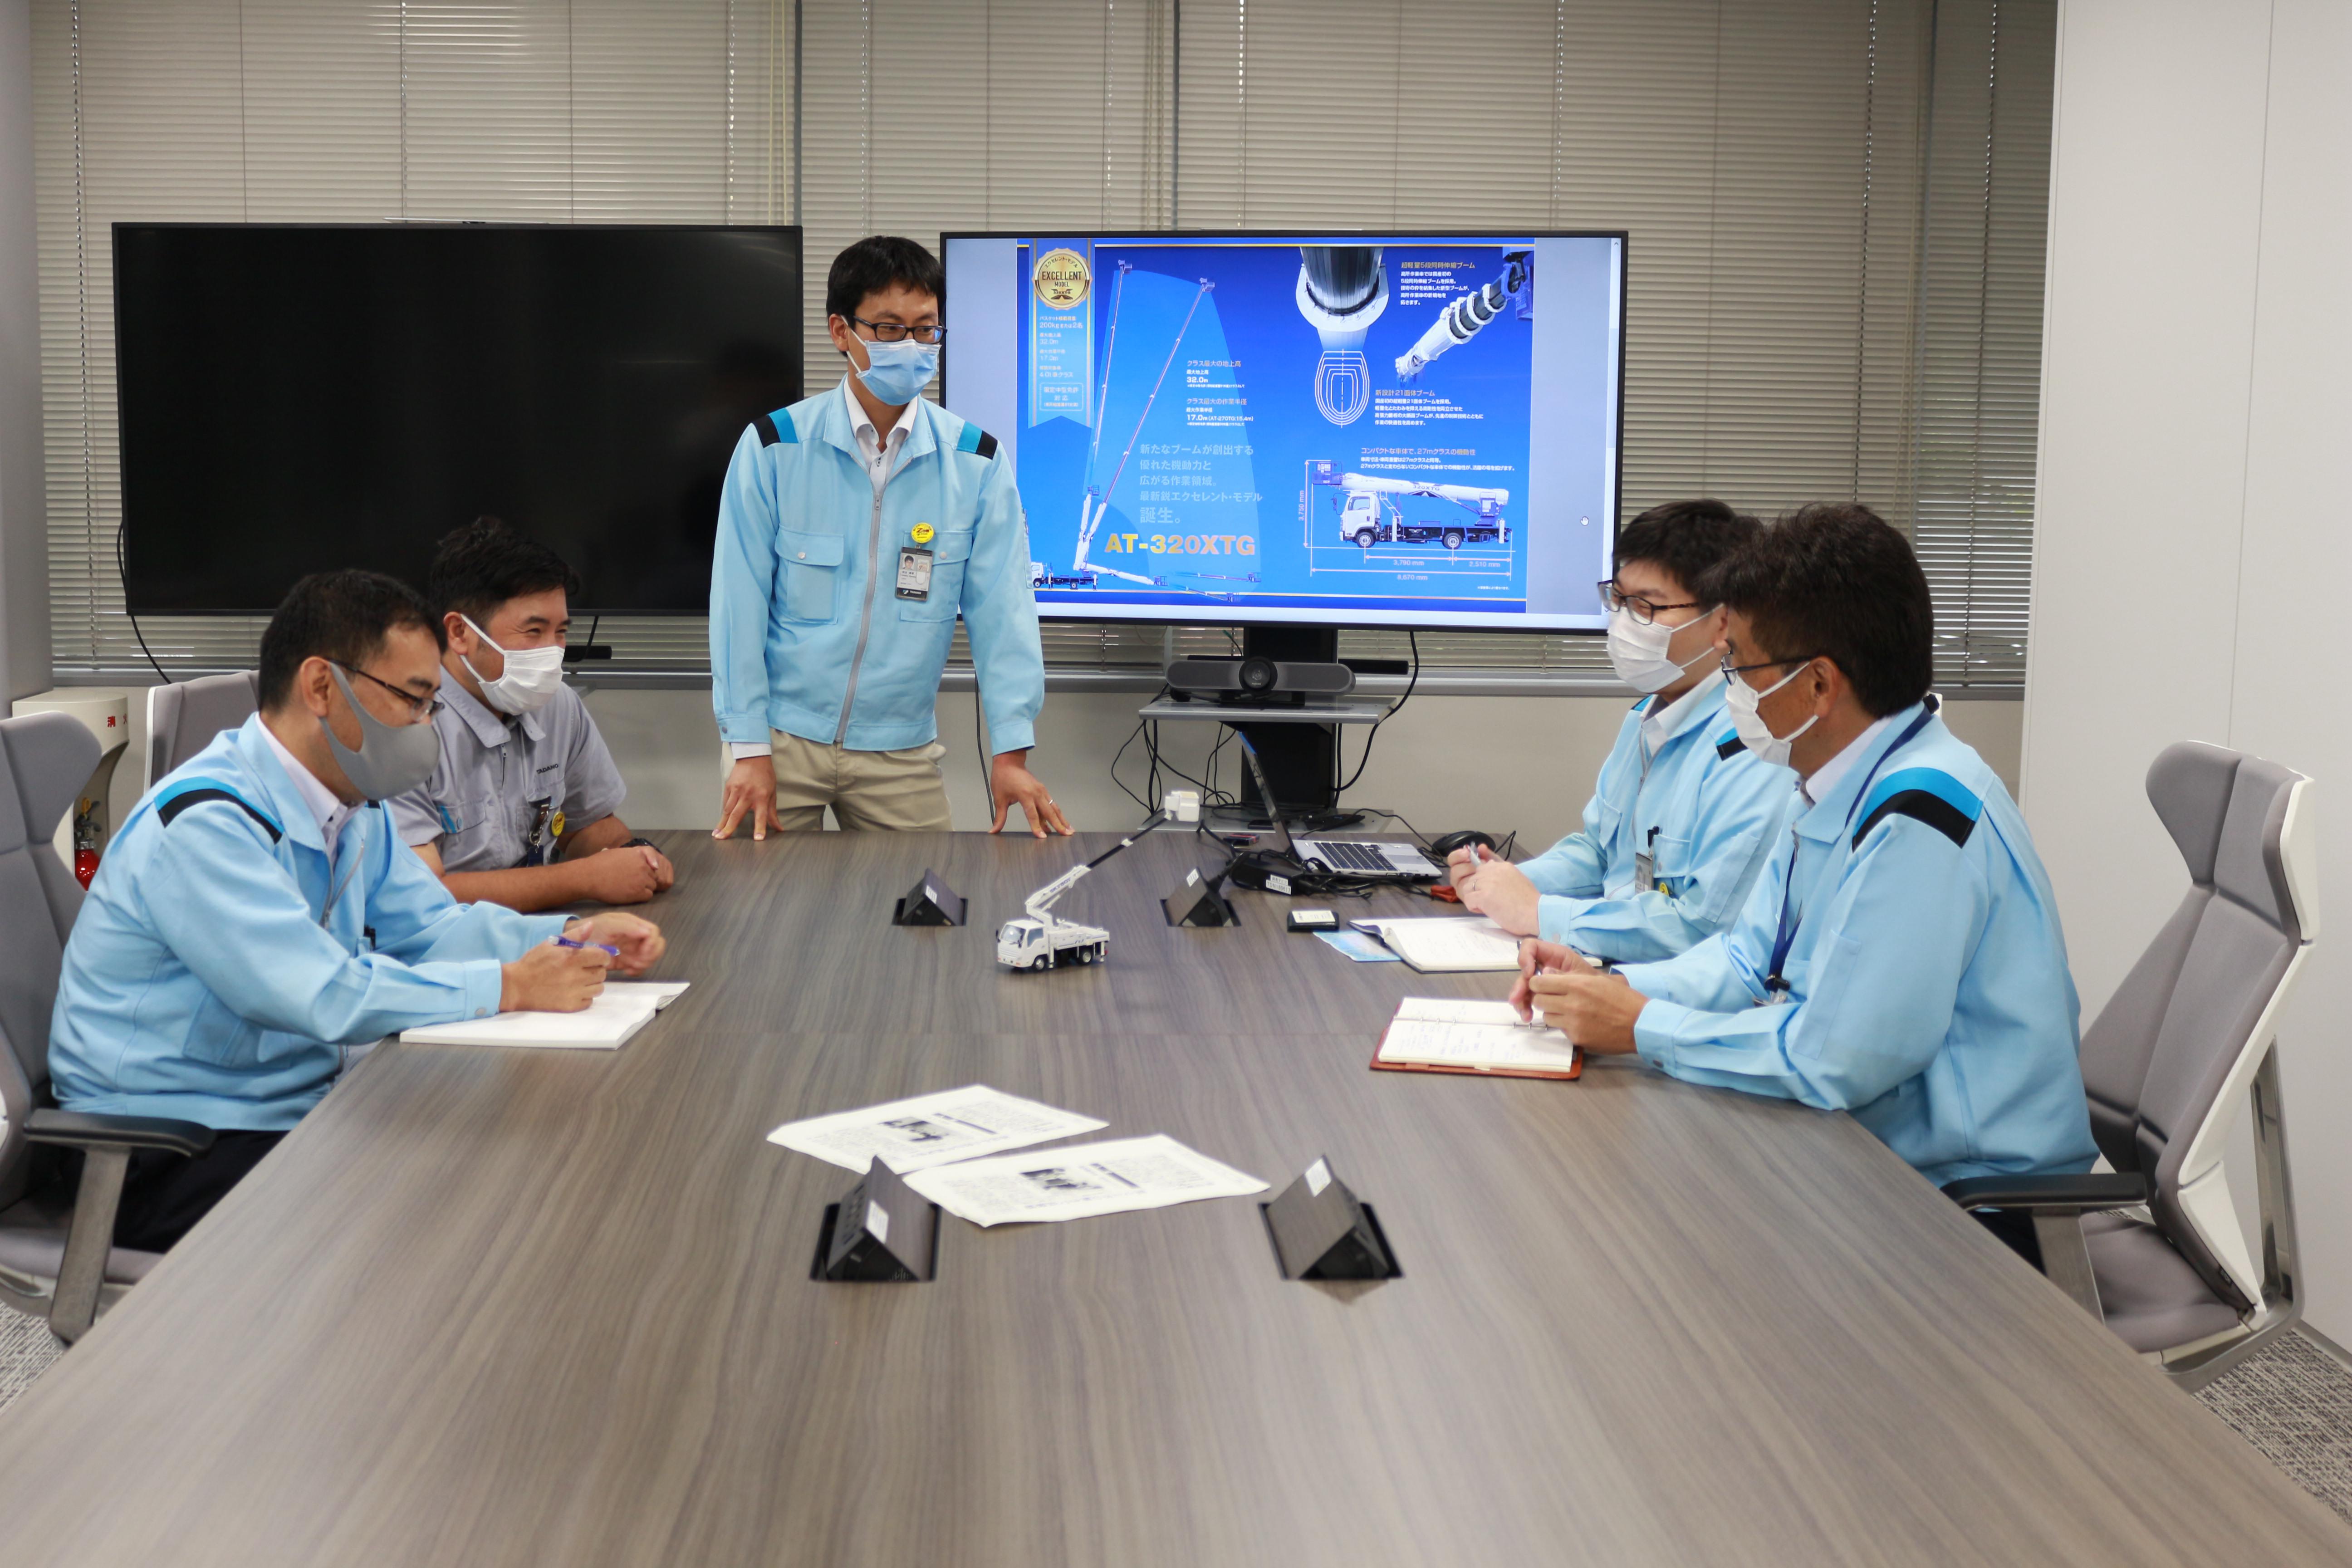 Chief Designer Mr. Yamashita (2nd from the right) and the rest AT-320XTG Design team